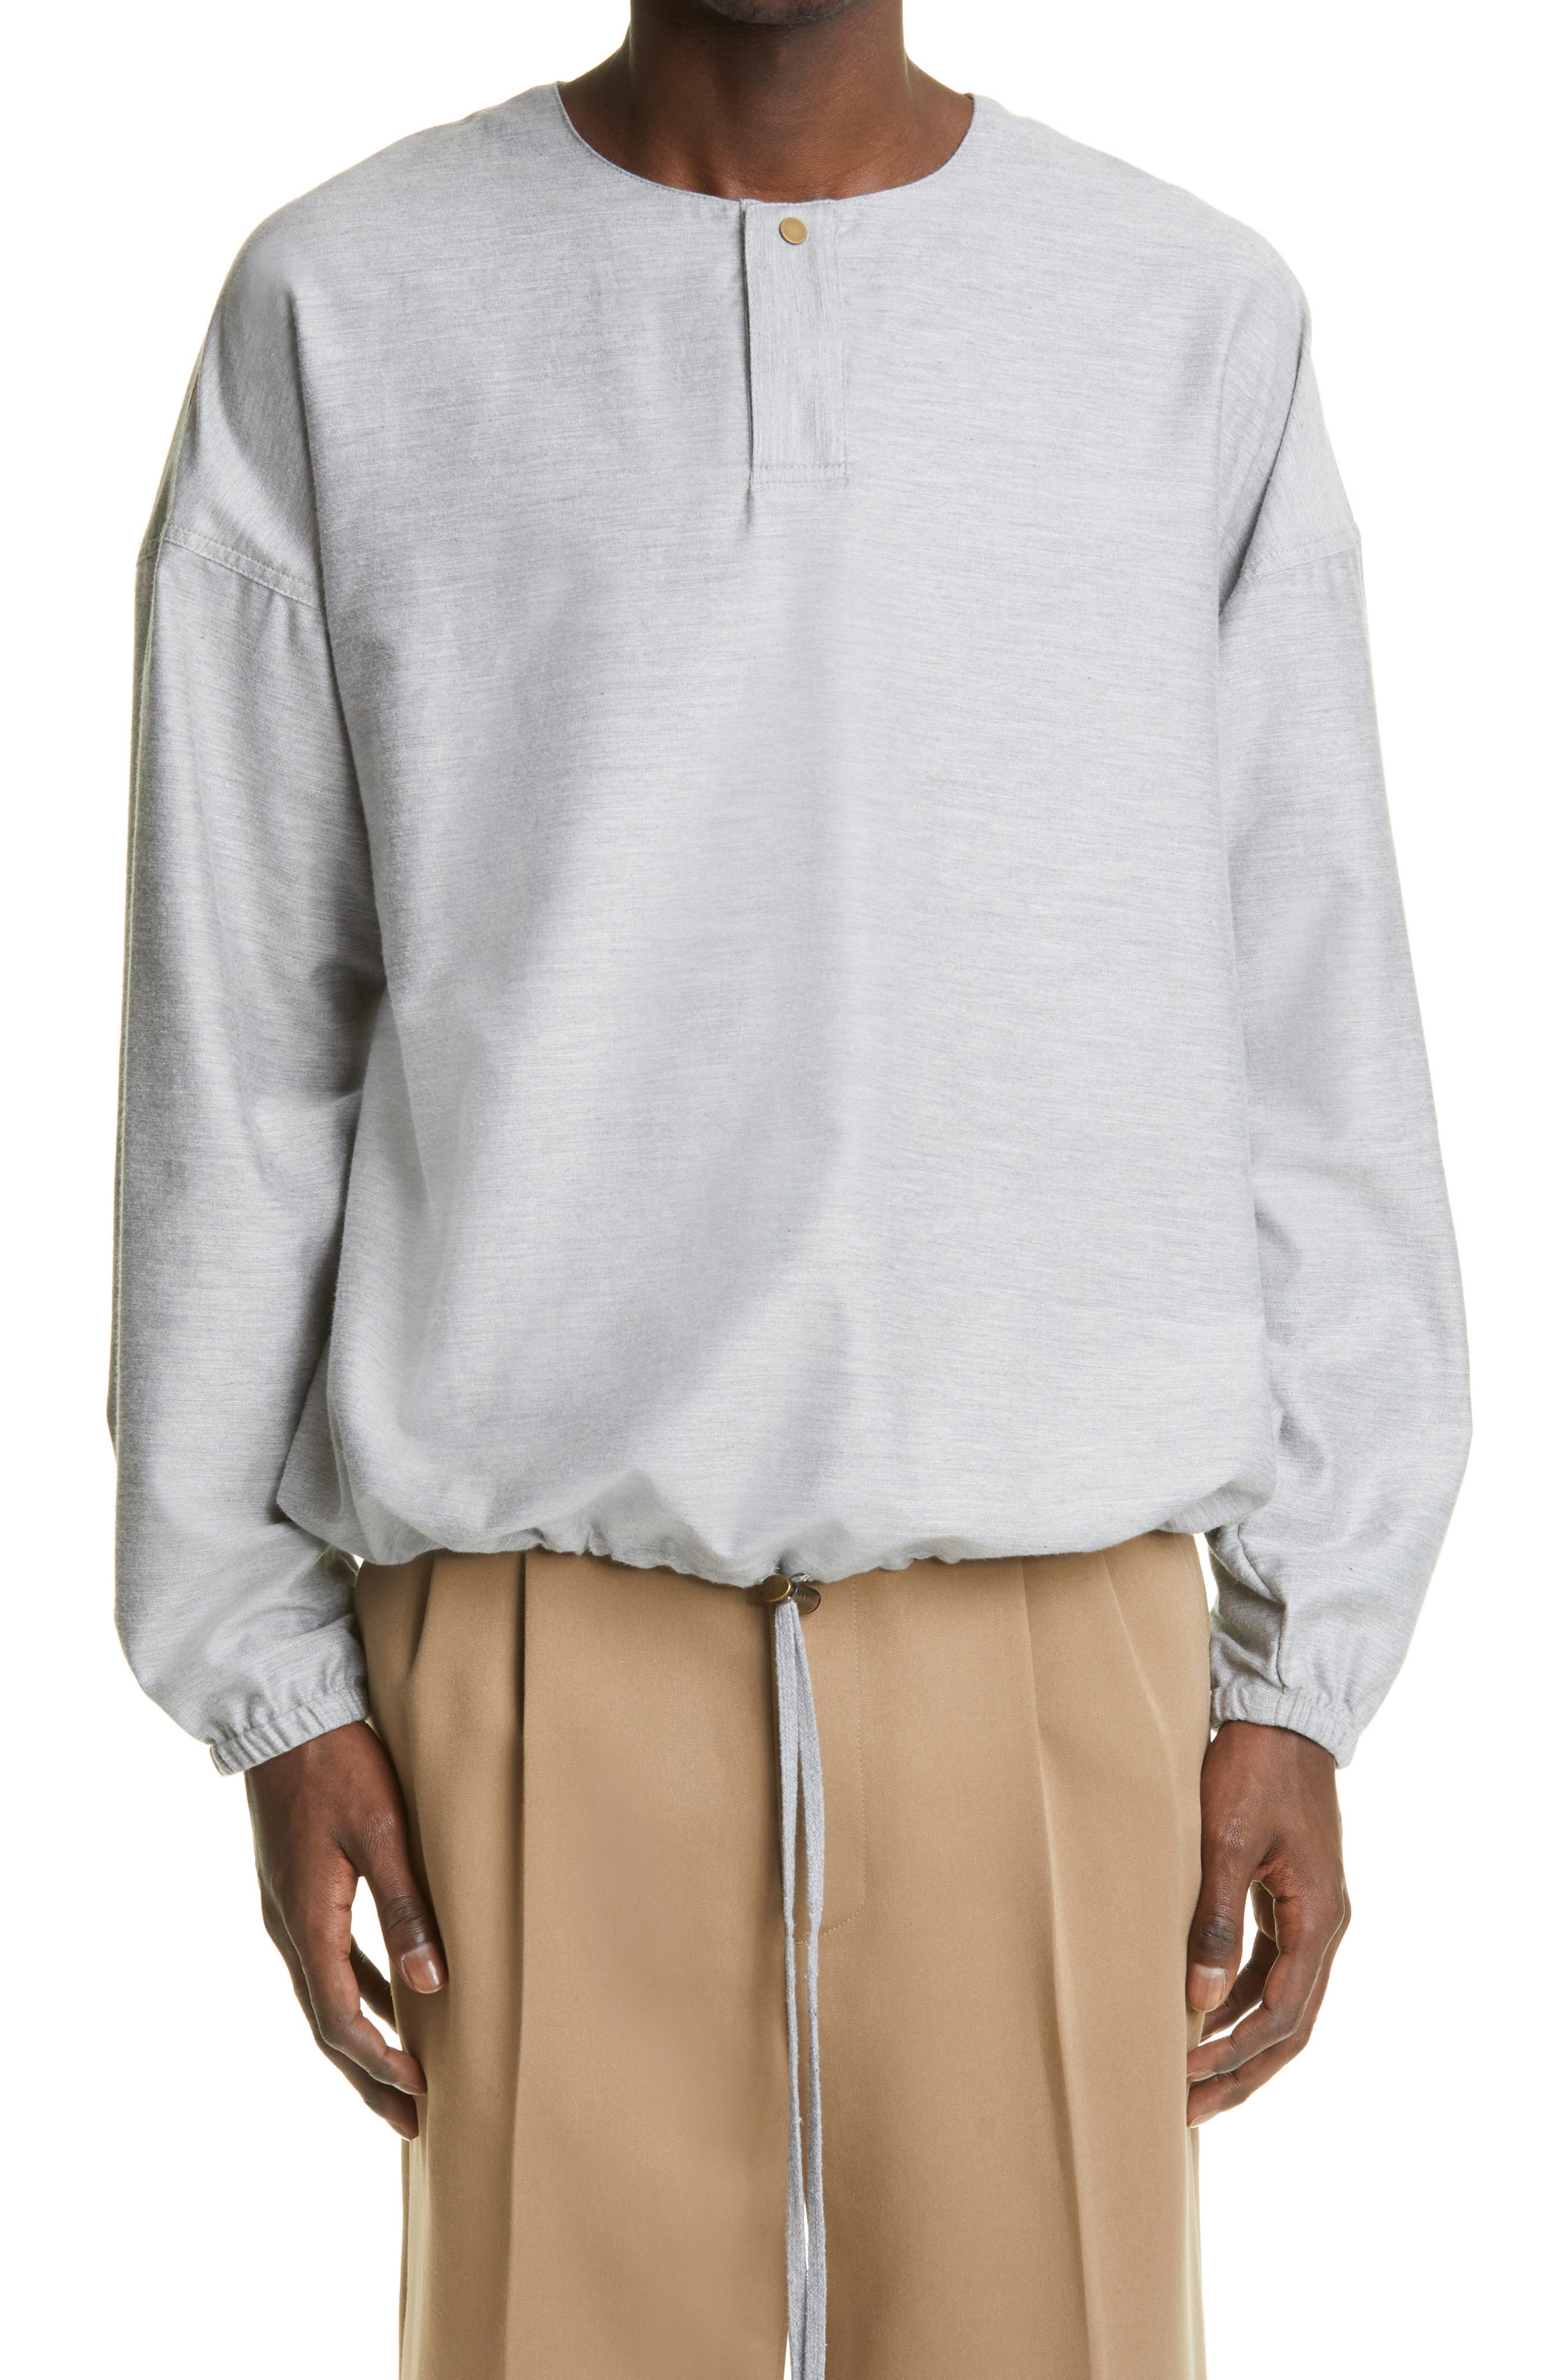 Fear of God Batting Practice Cotton Jacket in Middle Grey at Nordstrom, Size Medium